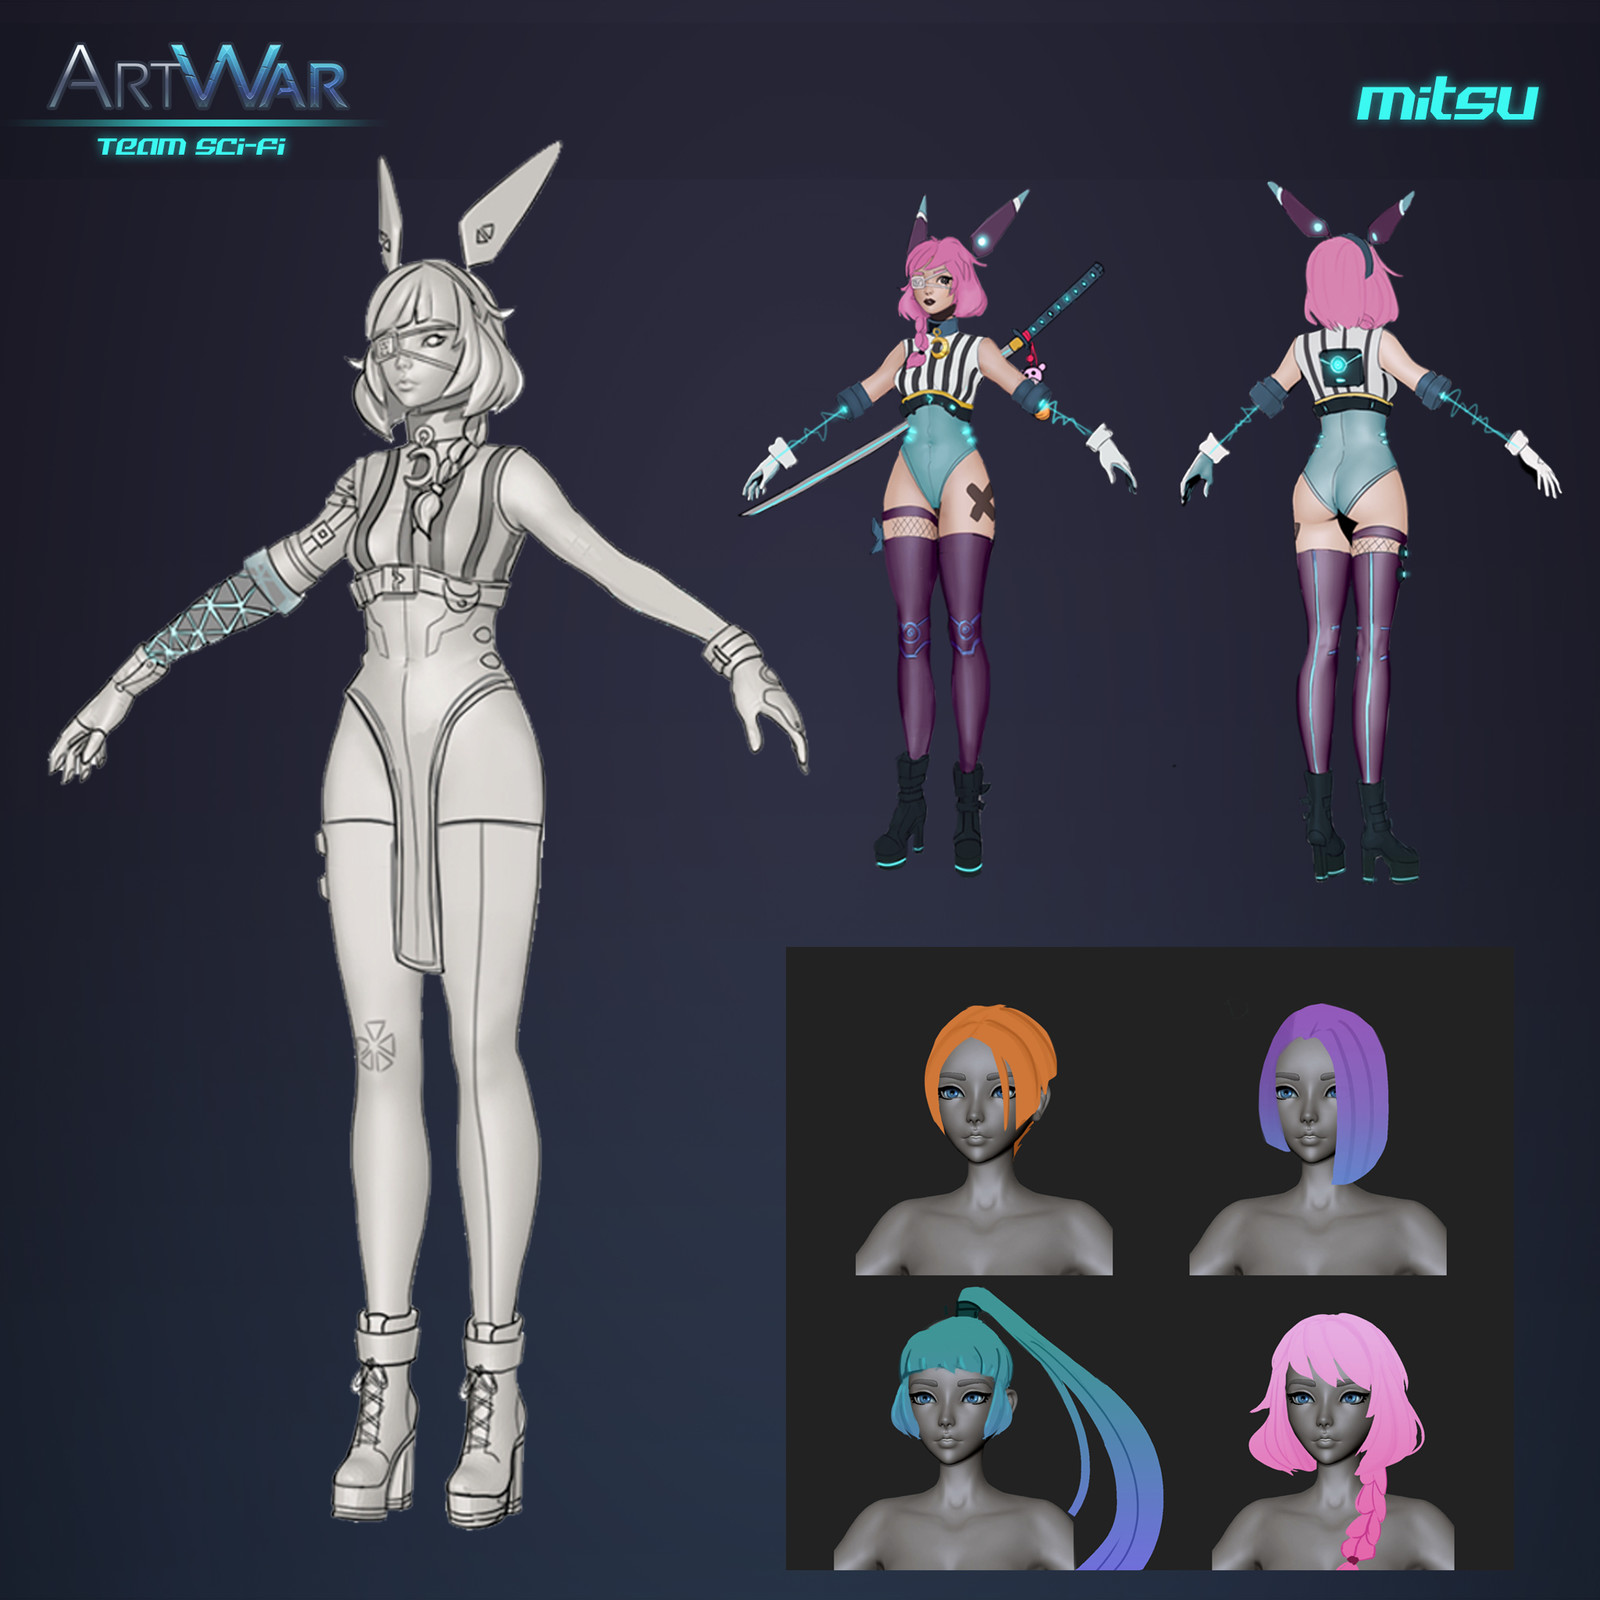 Initial concepts for Mitsu